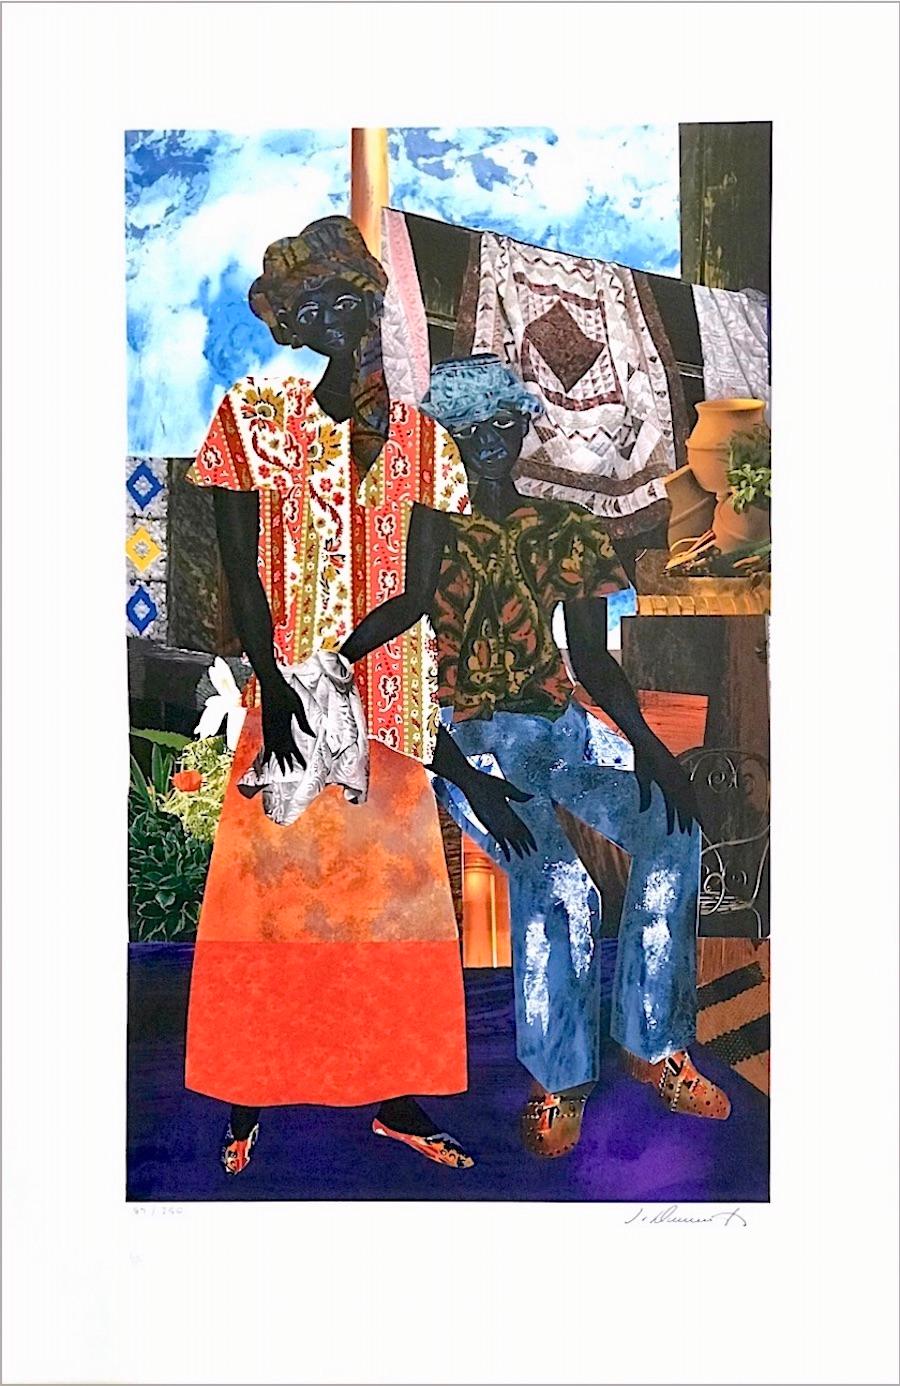 James Demark Portrait Print - BACKYARD Signed Lithograph, Black Couple, African American Heritage, Quilts 